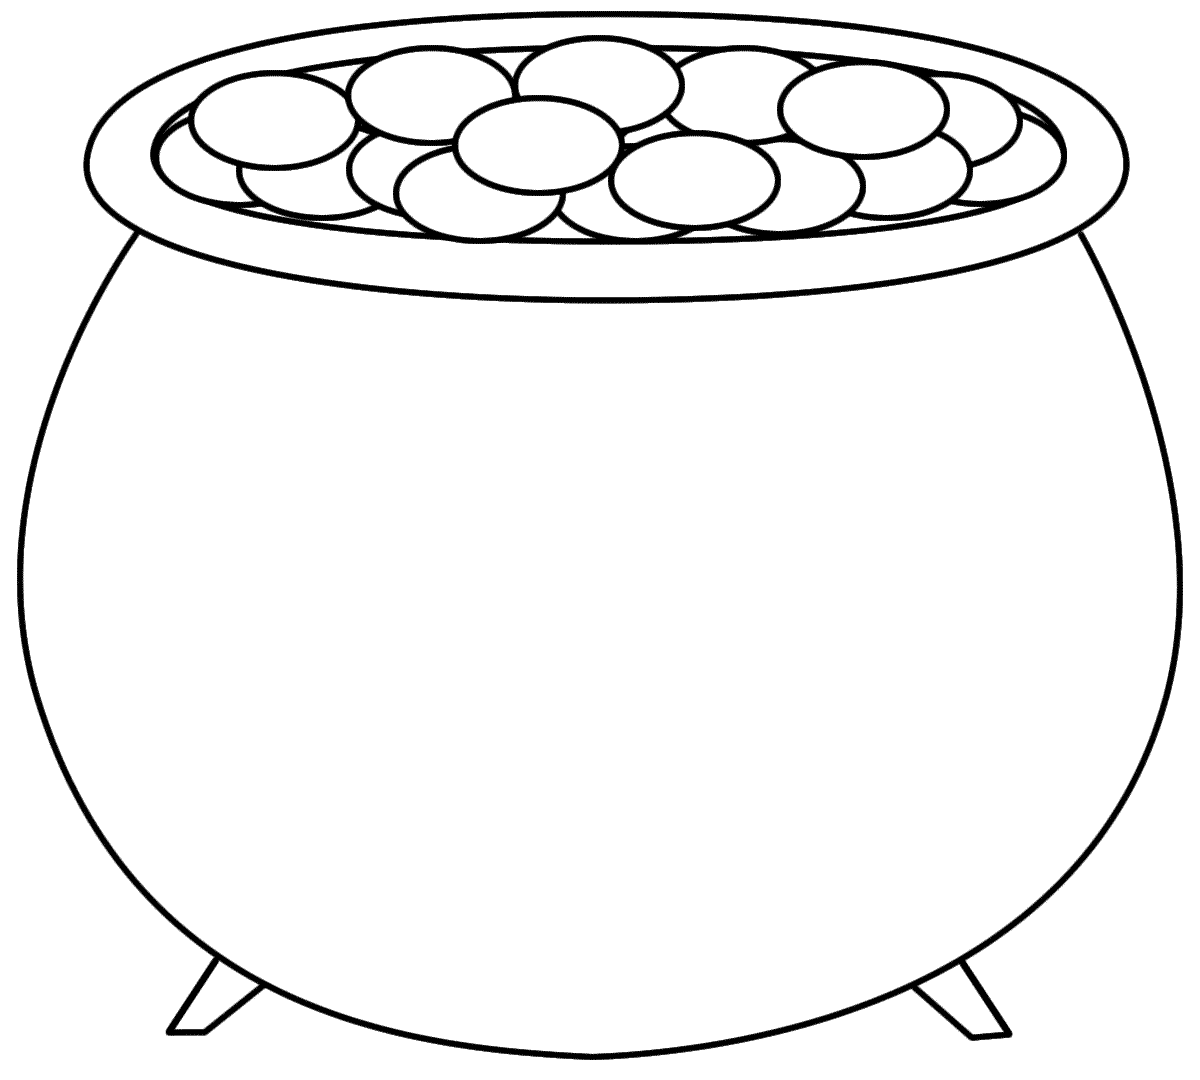 Rainbow Pot Of Gold Coloring Page | Clipart library - Free Clipart 